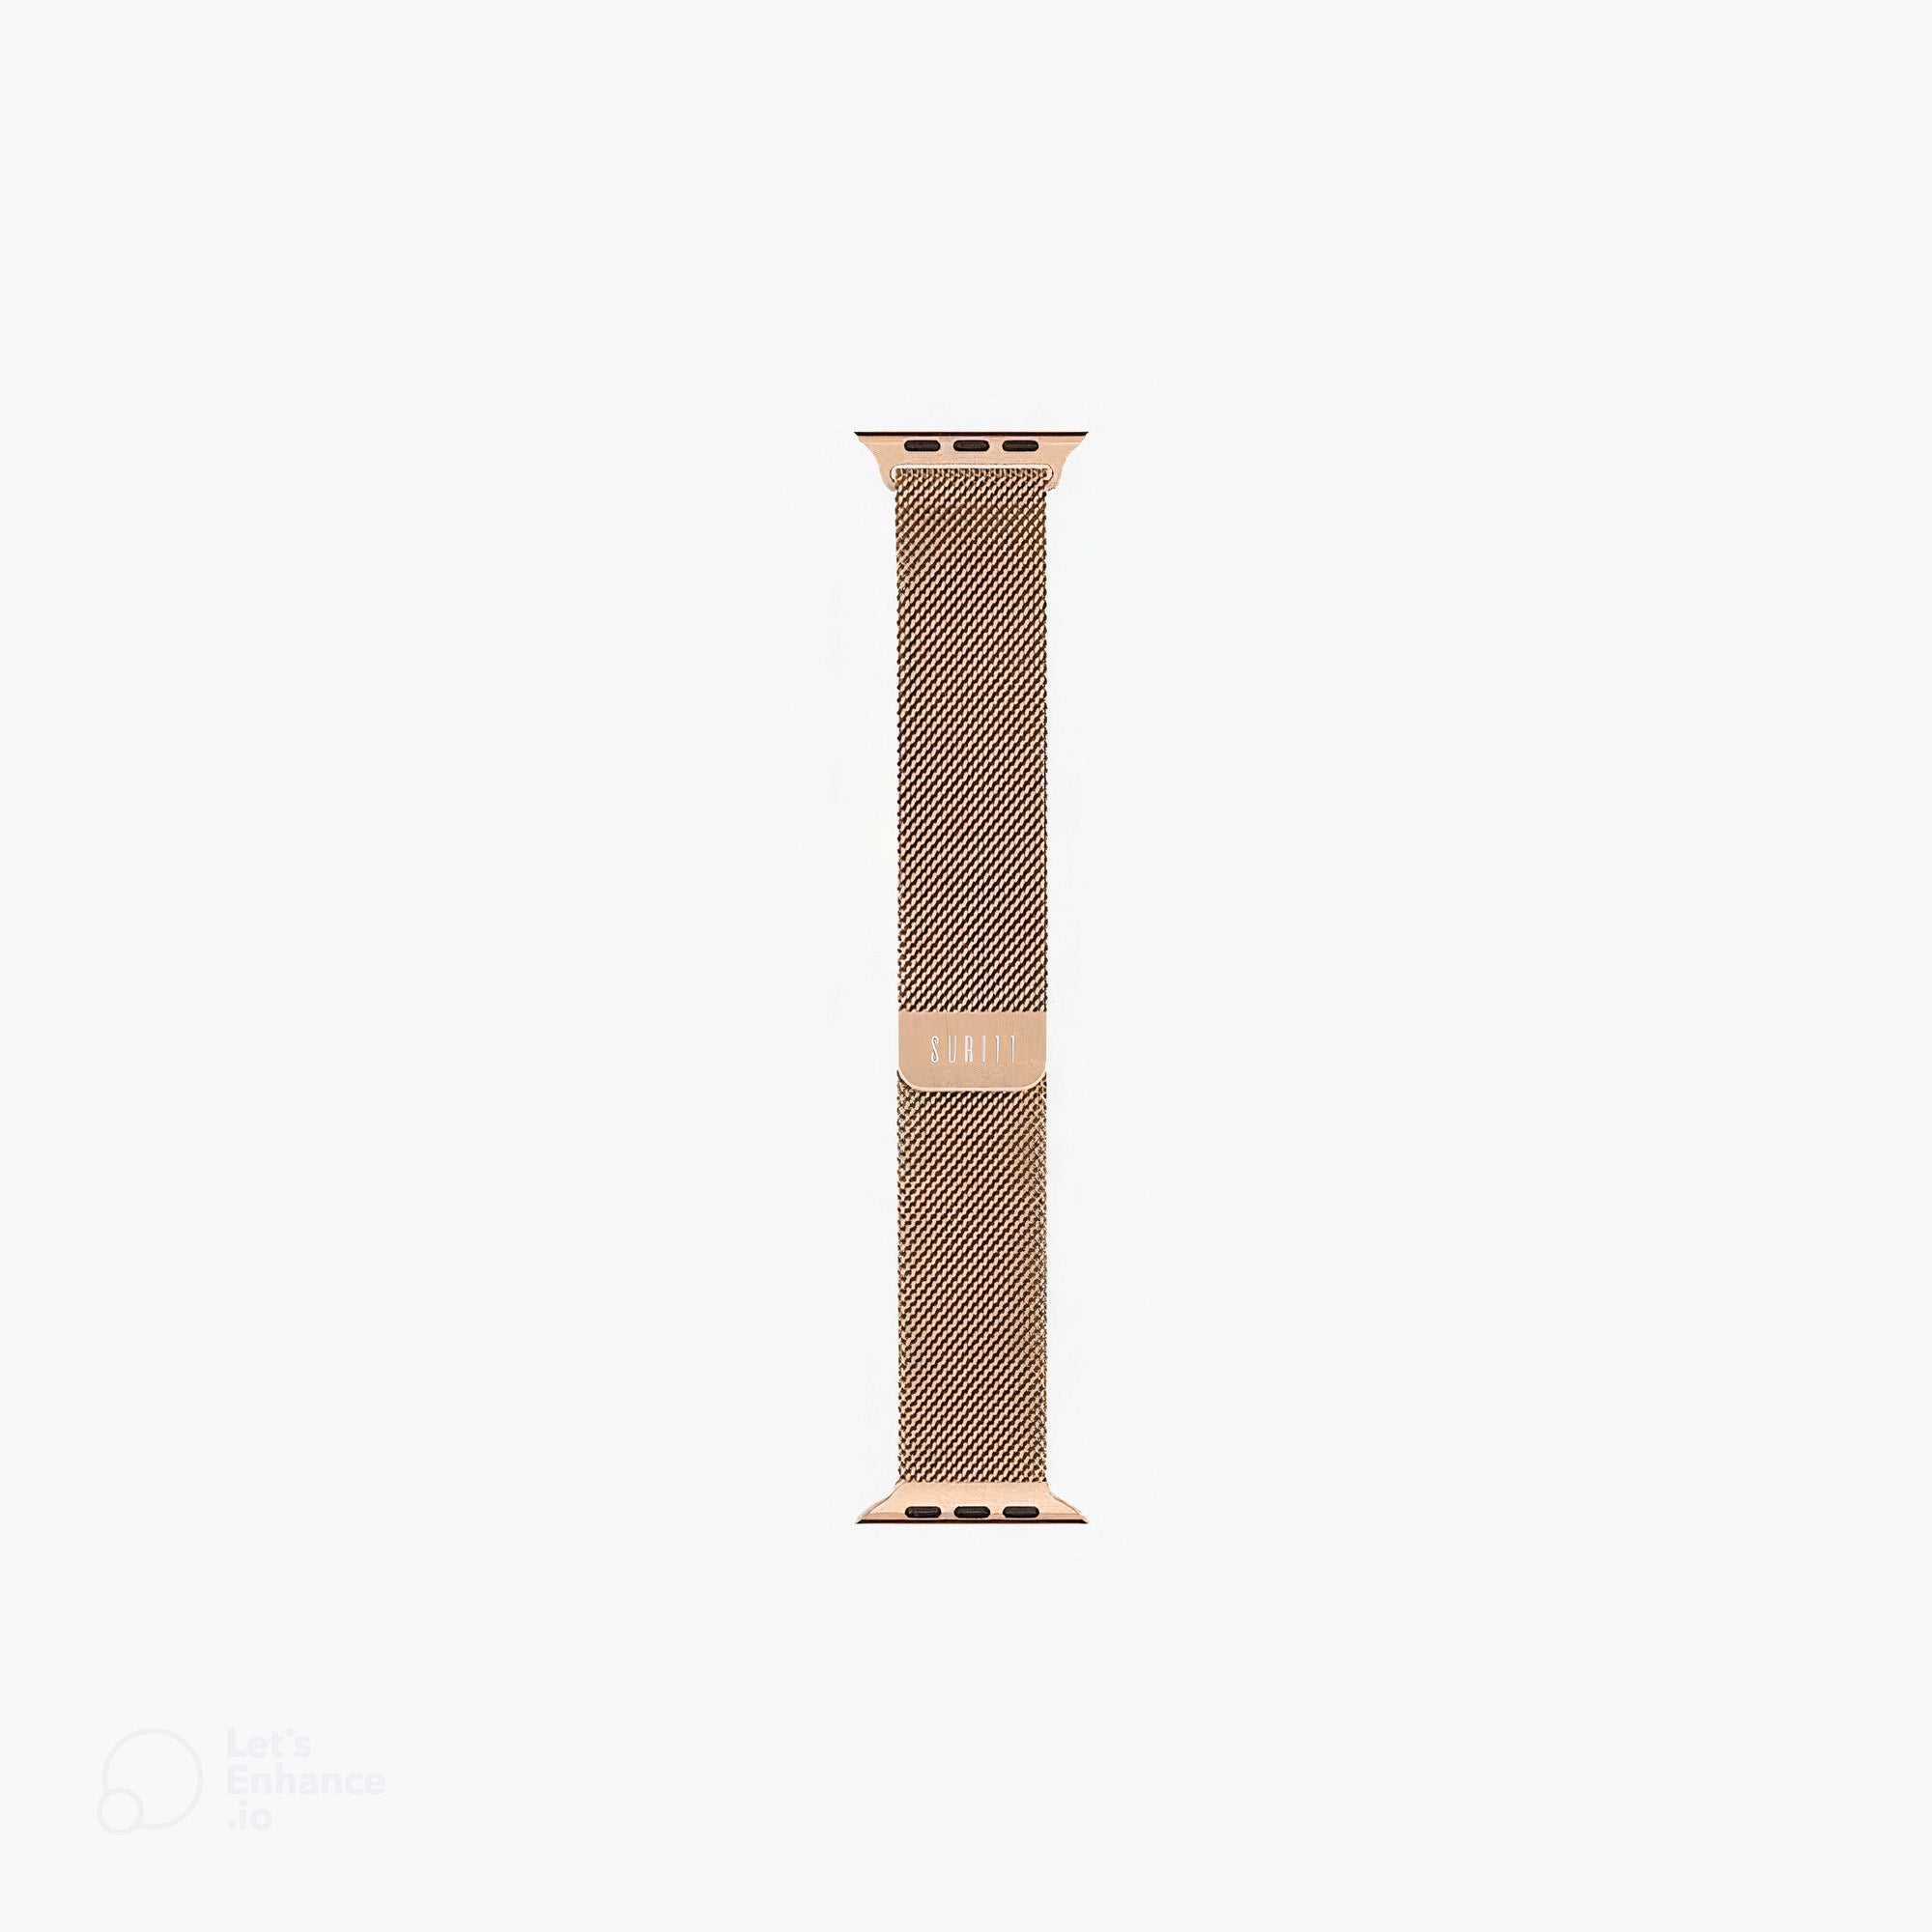 Apple Watch Band Milanese Gold